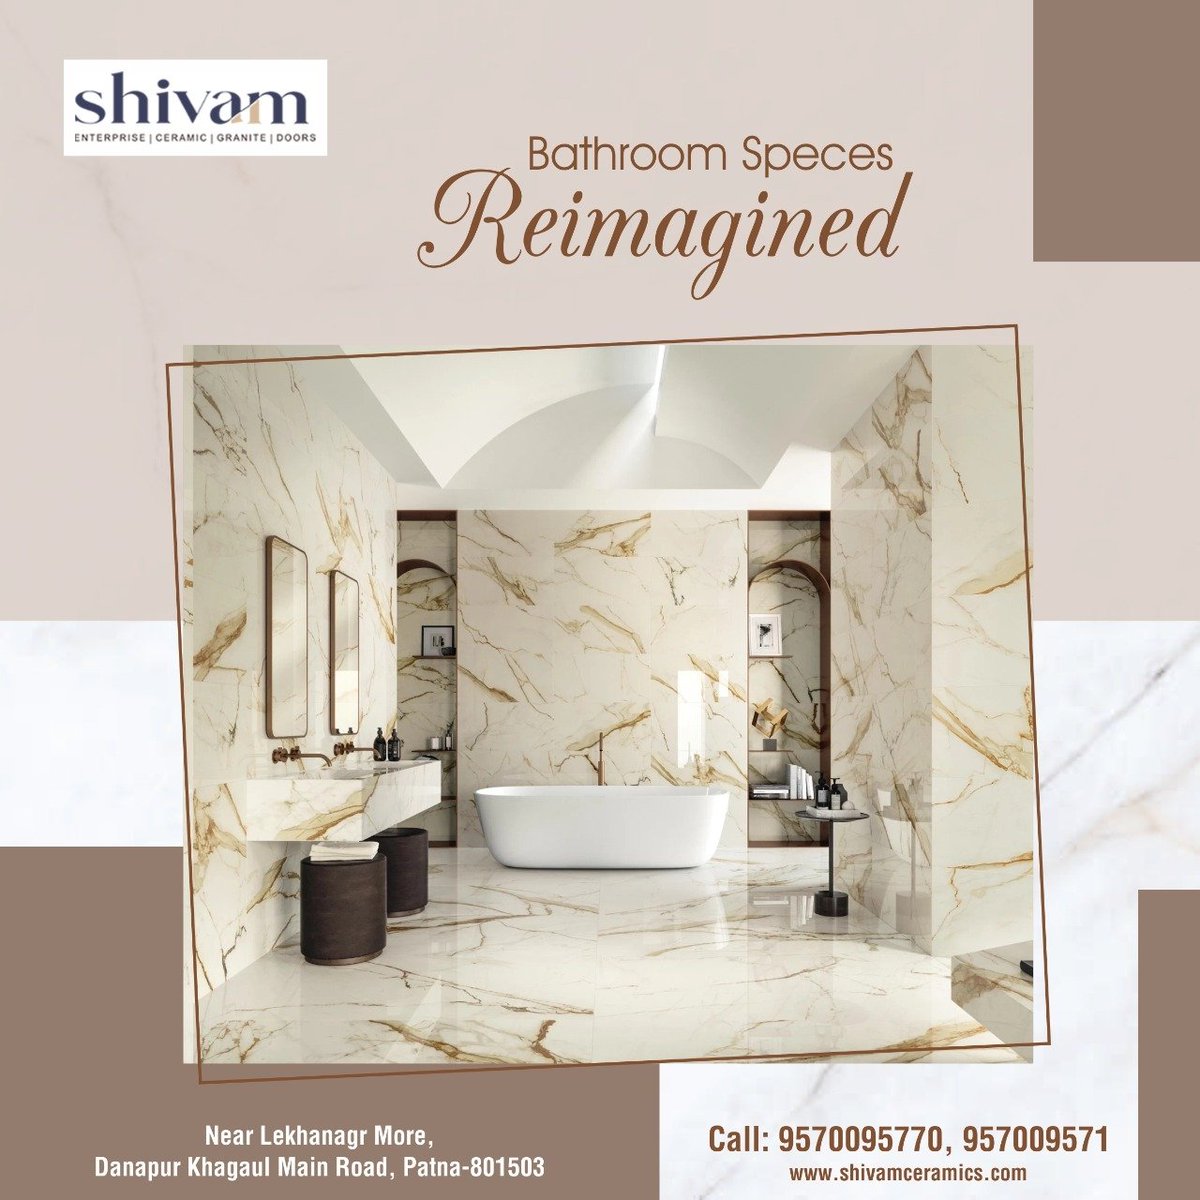 Redesign your bathroom with the perfect collection of international quality best in class bathroom fittings from the best range of Shivam Ceramic✌️
.
.
.
.
#shivamgranites  #shivamdoors #ShivamTiles #ShivamBathware #ZameenSeJudey #LargestTileCollection #TileInnovation